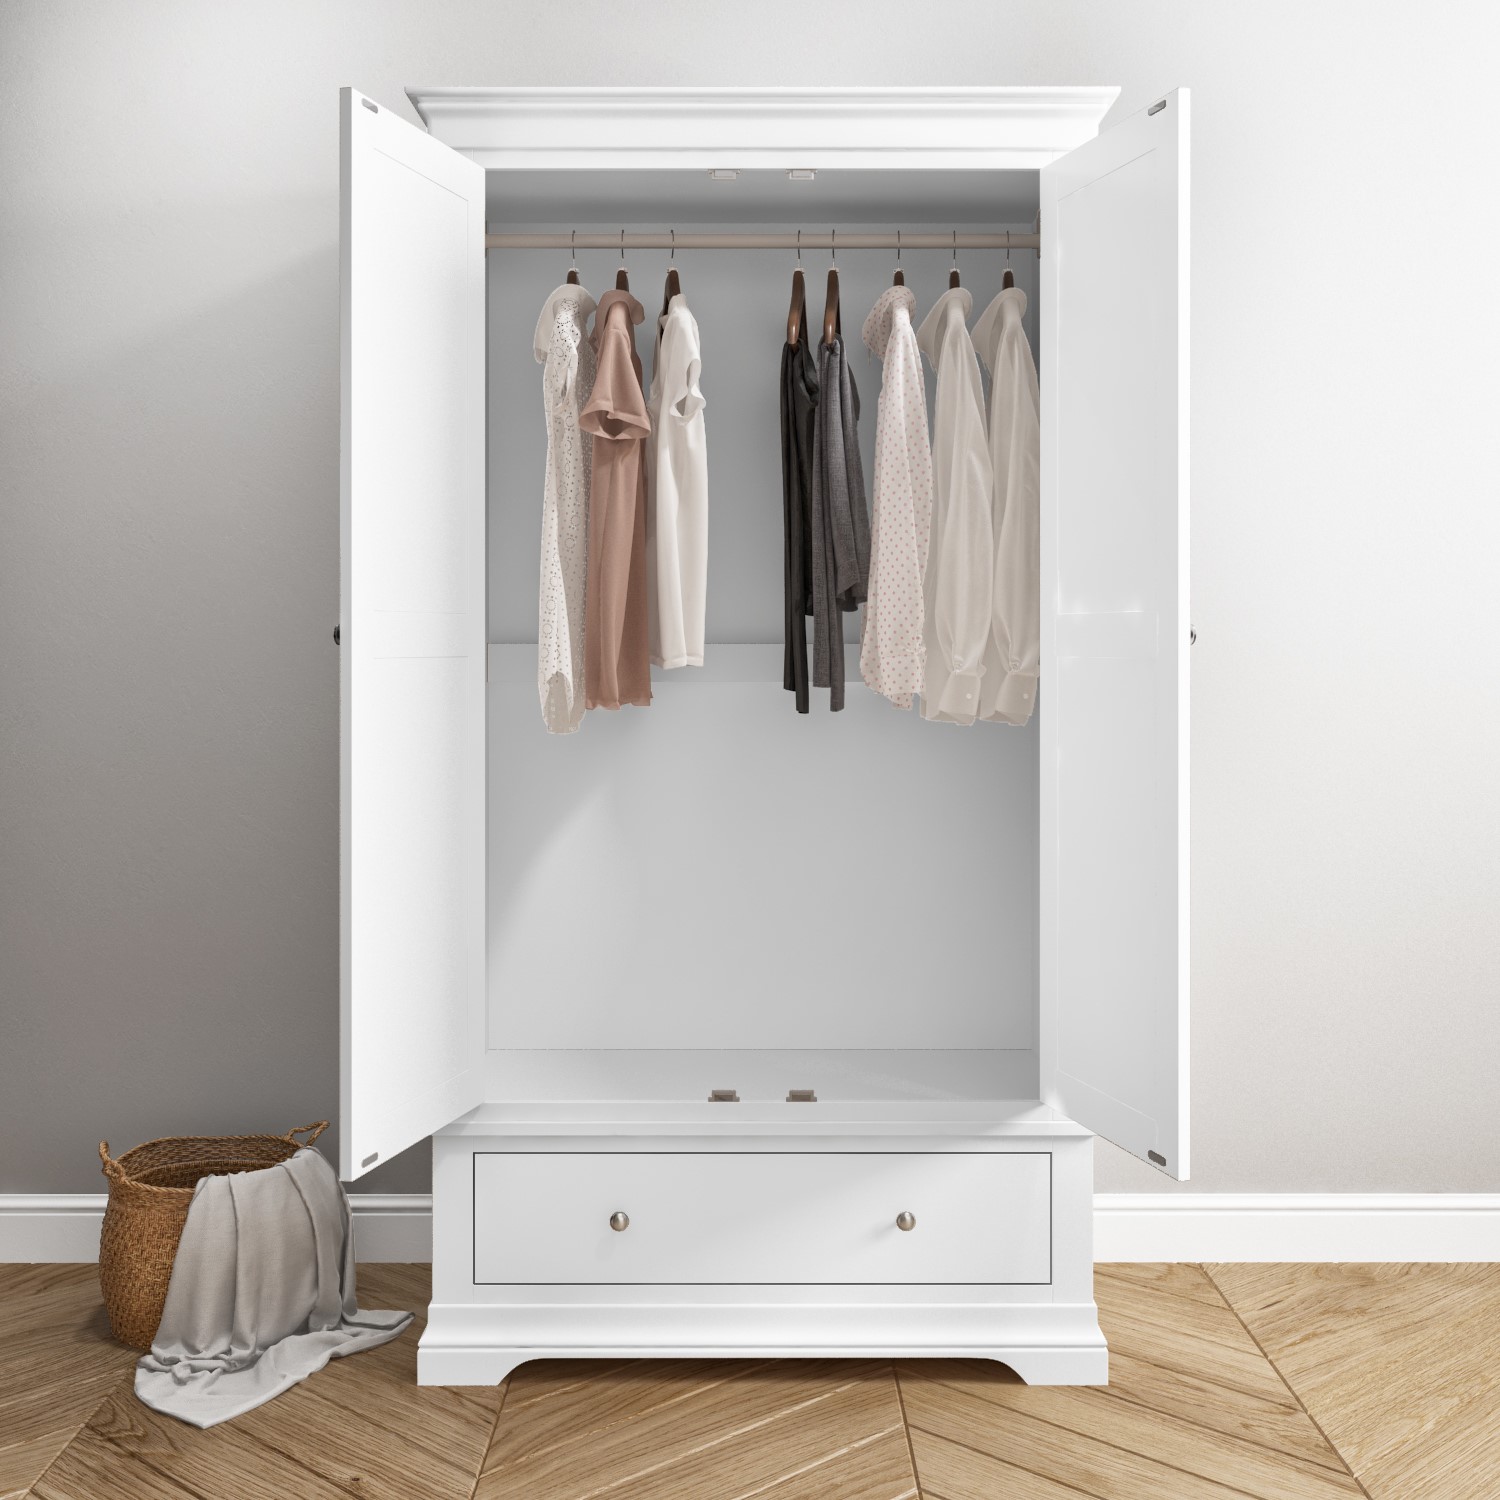 Read more about White 2 door 1 drawer wardrobe olivia